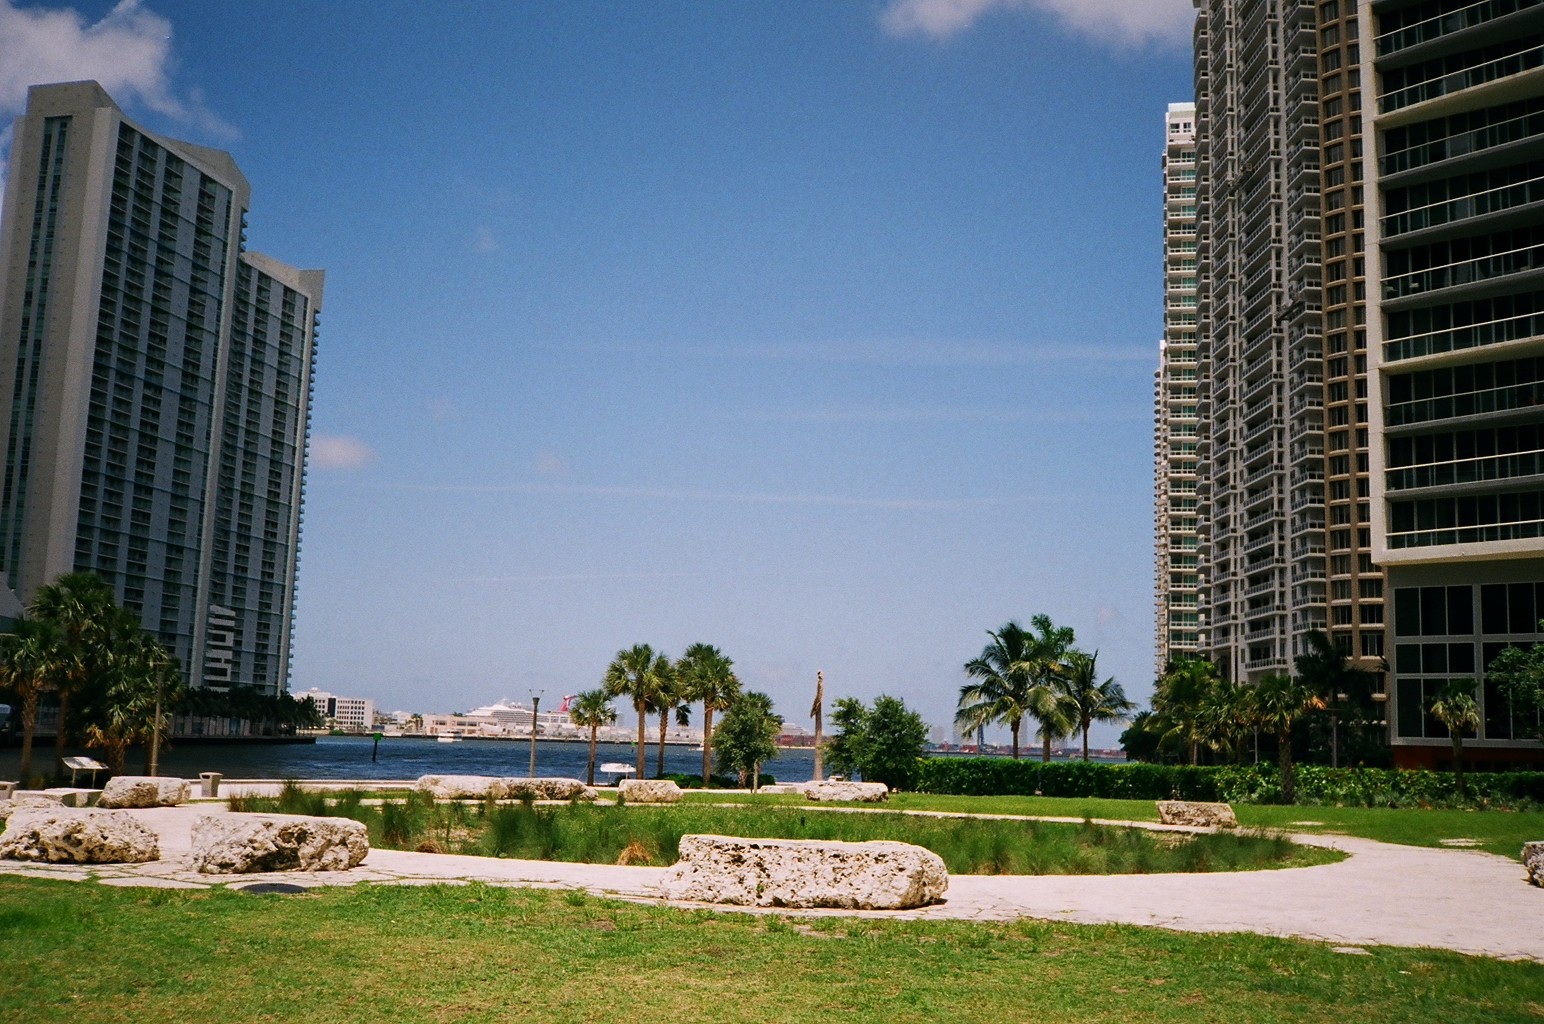 several buildings and small lawns are next to water